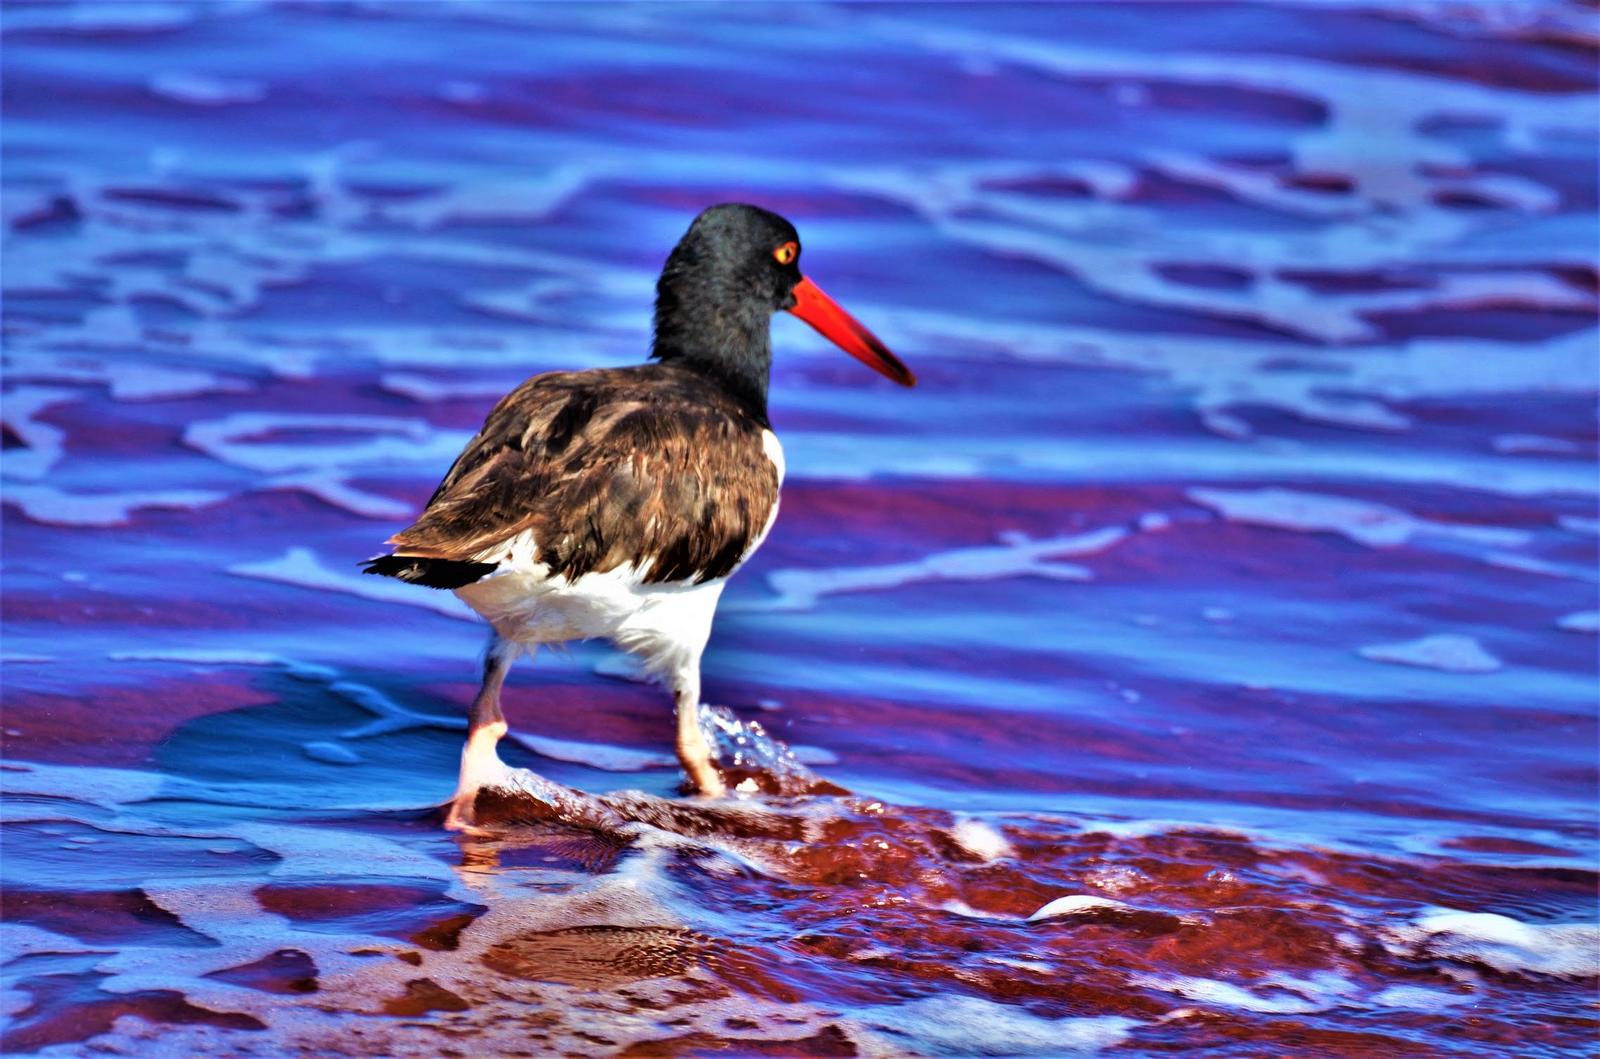 American Oystercatcher Photo by Alicia Thatcher